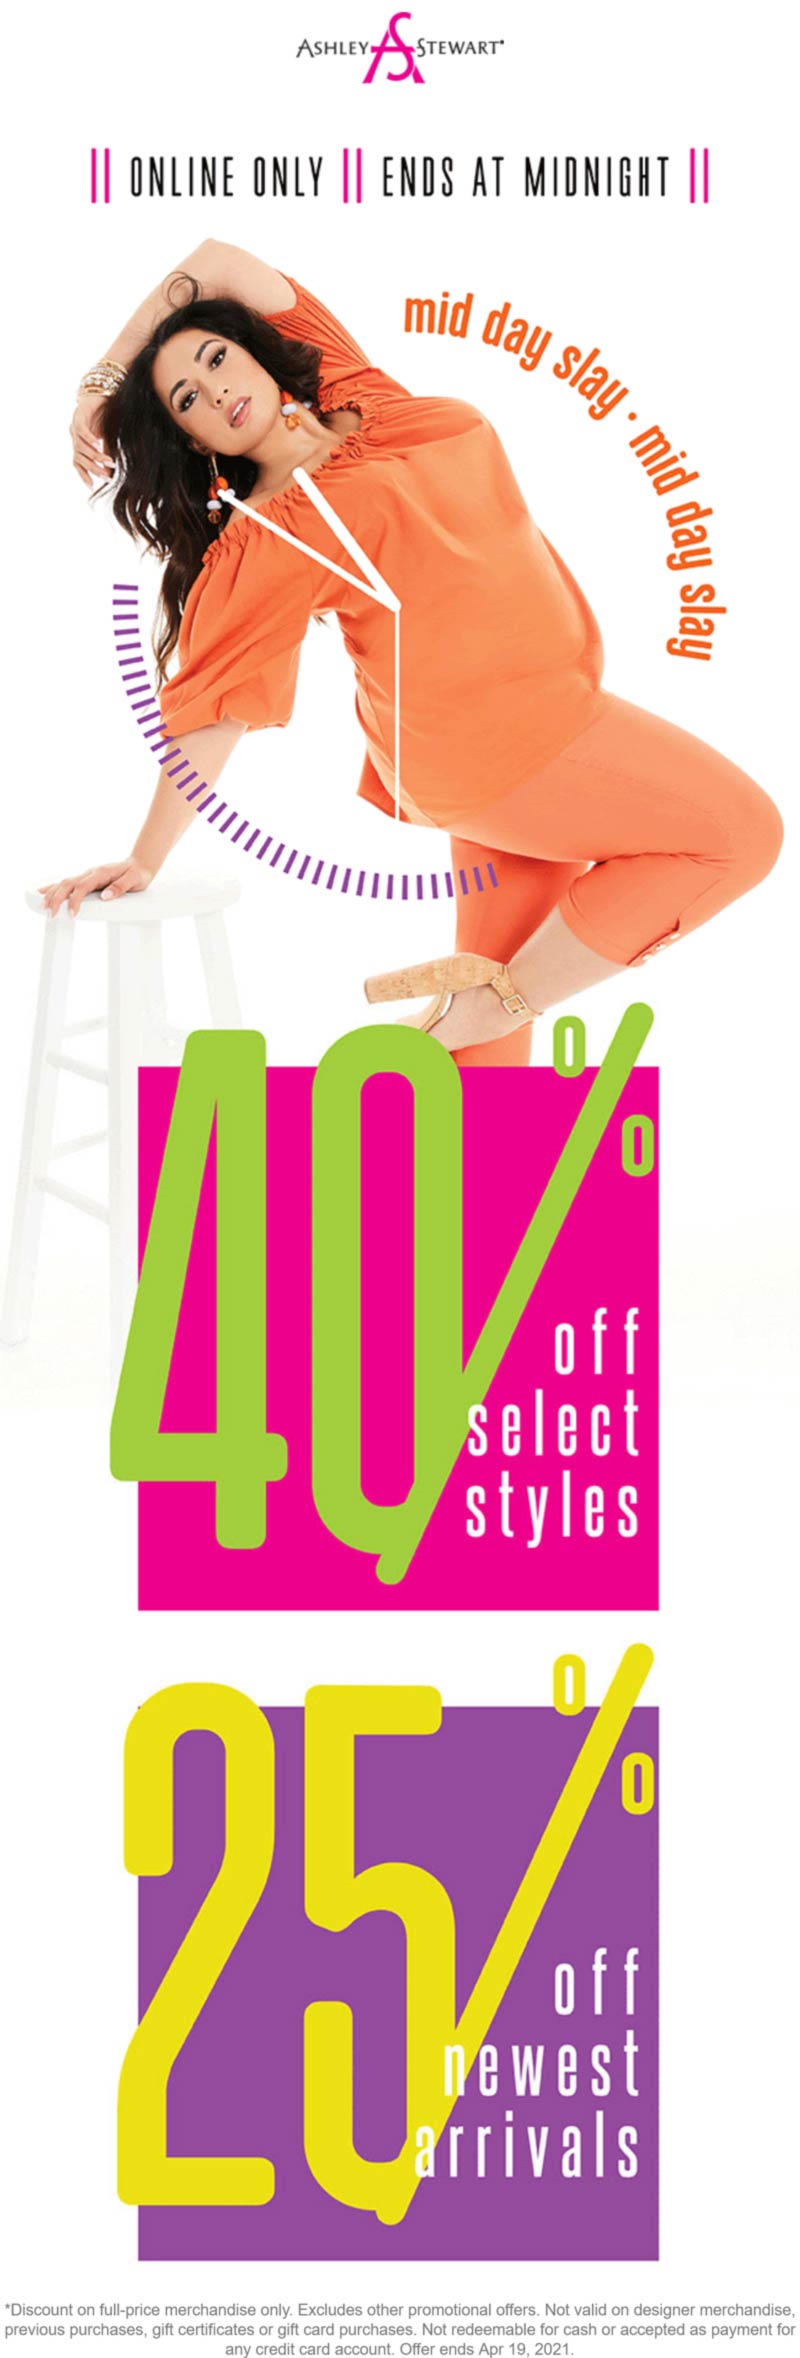 Ashley Stewart stores Coupon  25-40% off online today at Ashley Stewart #ashleystewart 